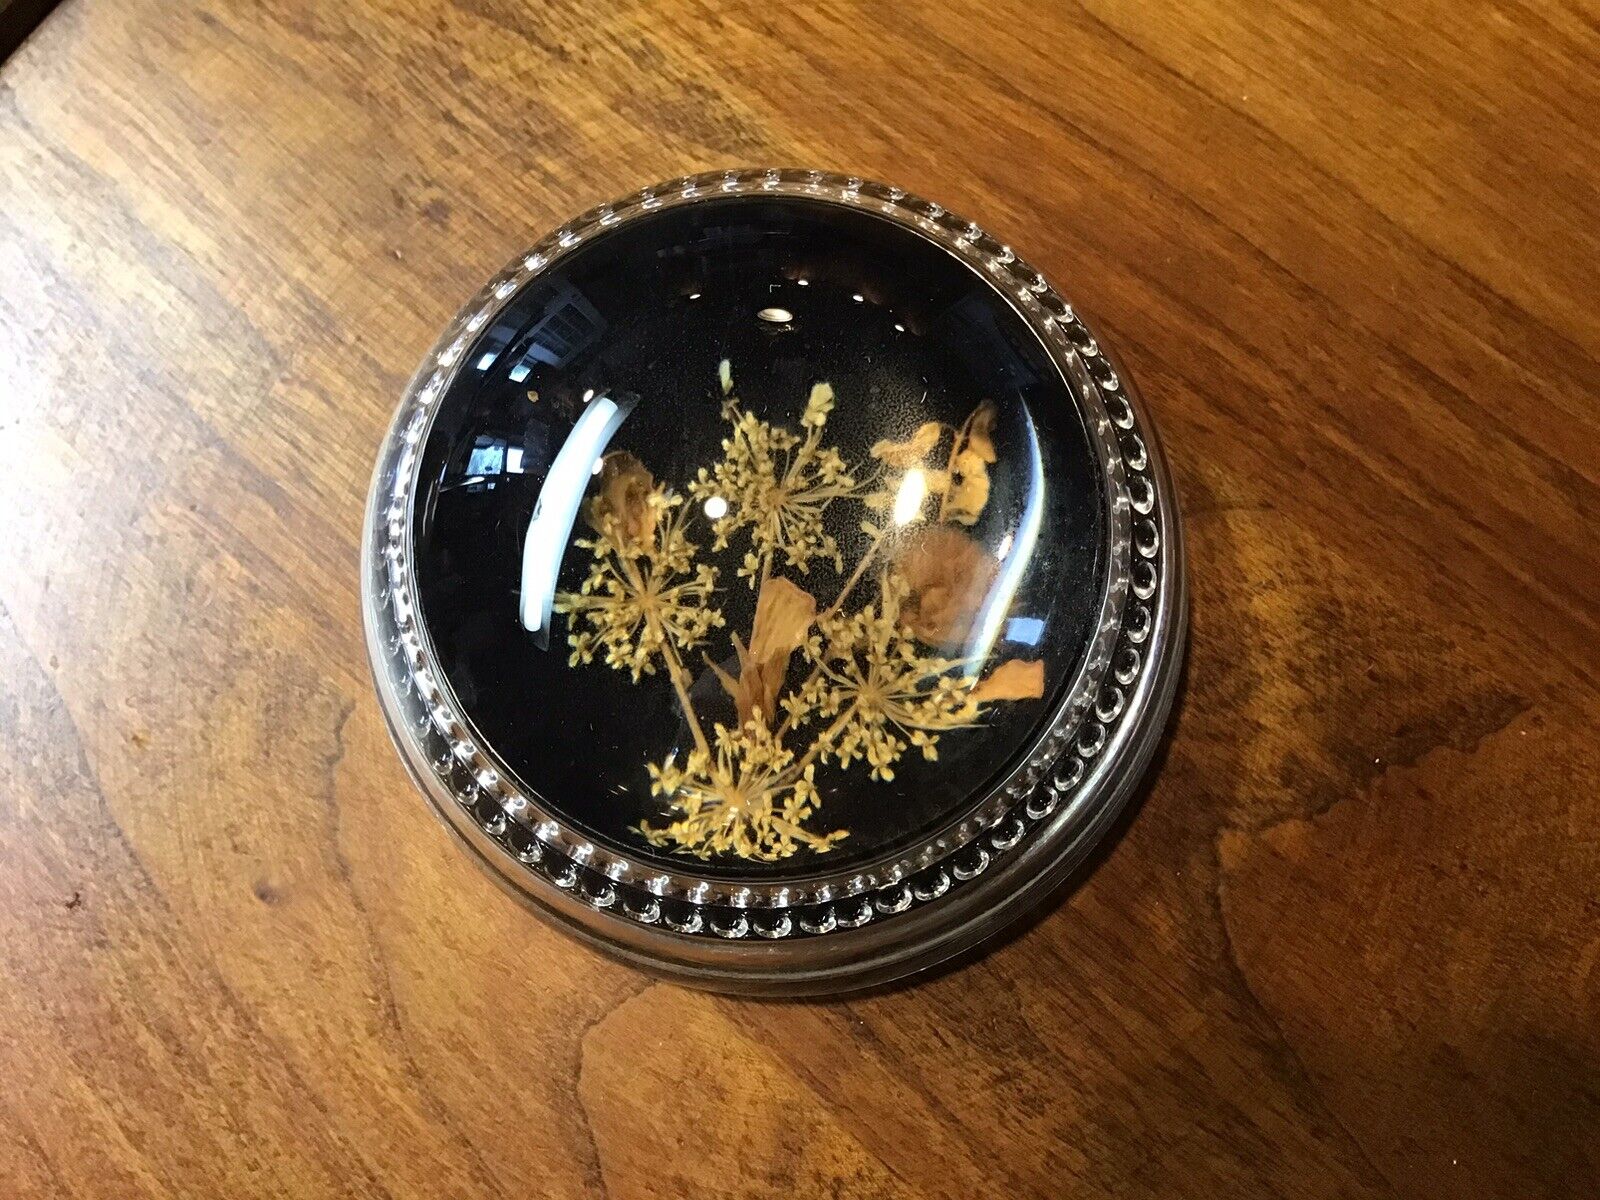 VINTAGE 1960-70s DRIED FLOWERS SEALED IN GLASS DOME BUBBLE PAPERWEIGHT MAGNIFIED